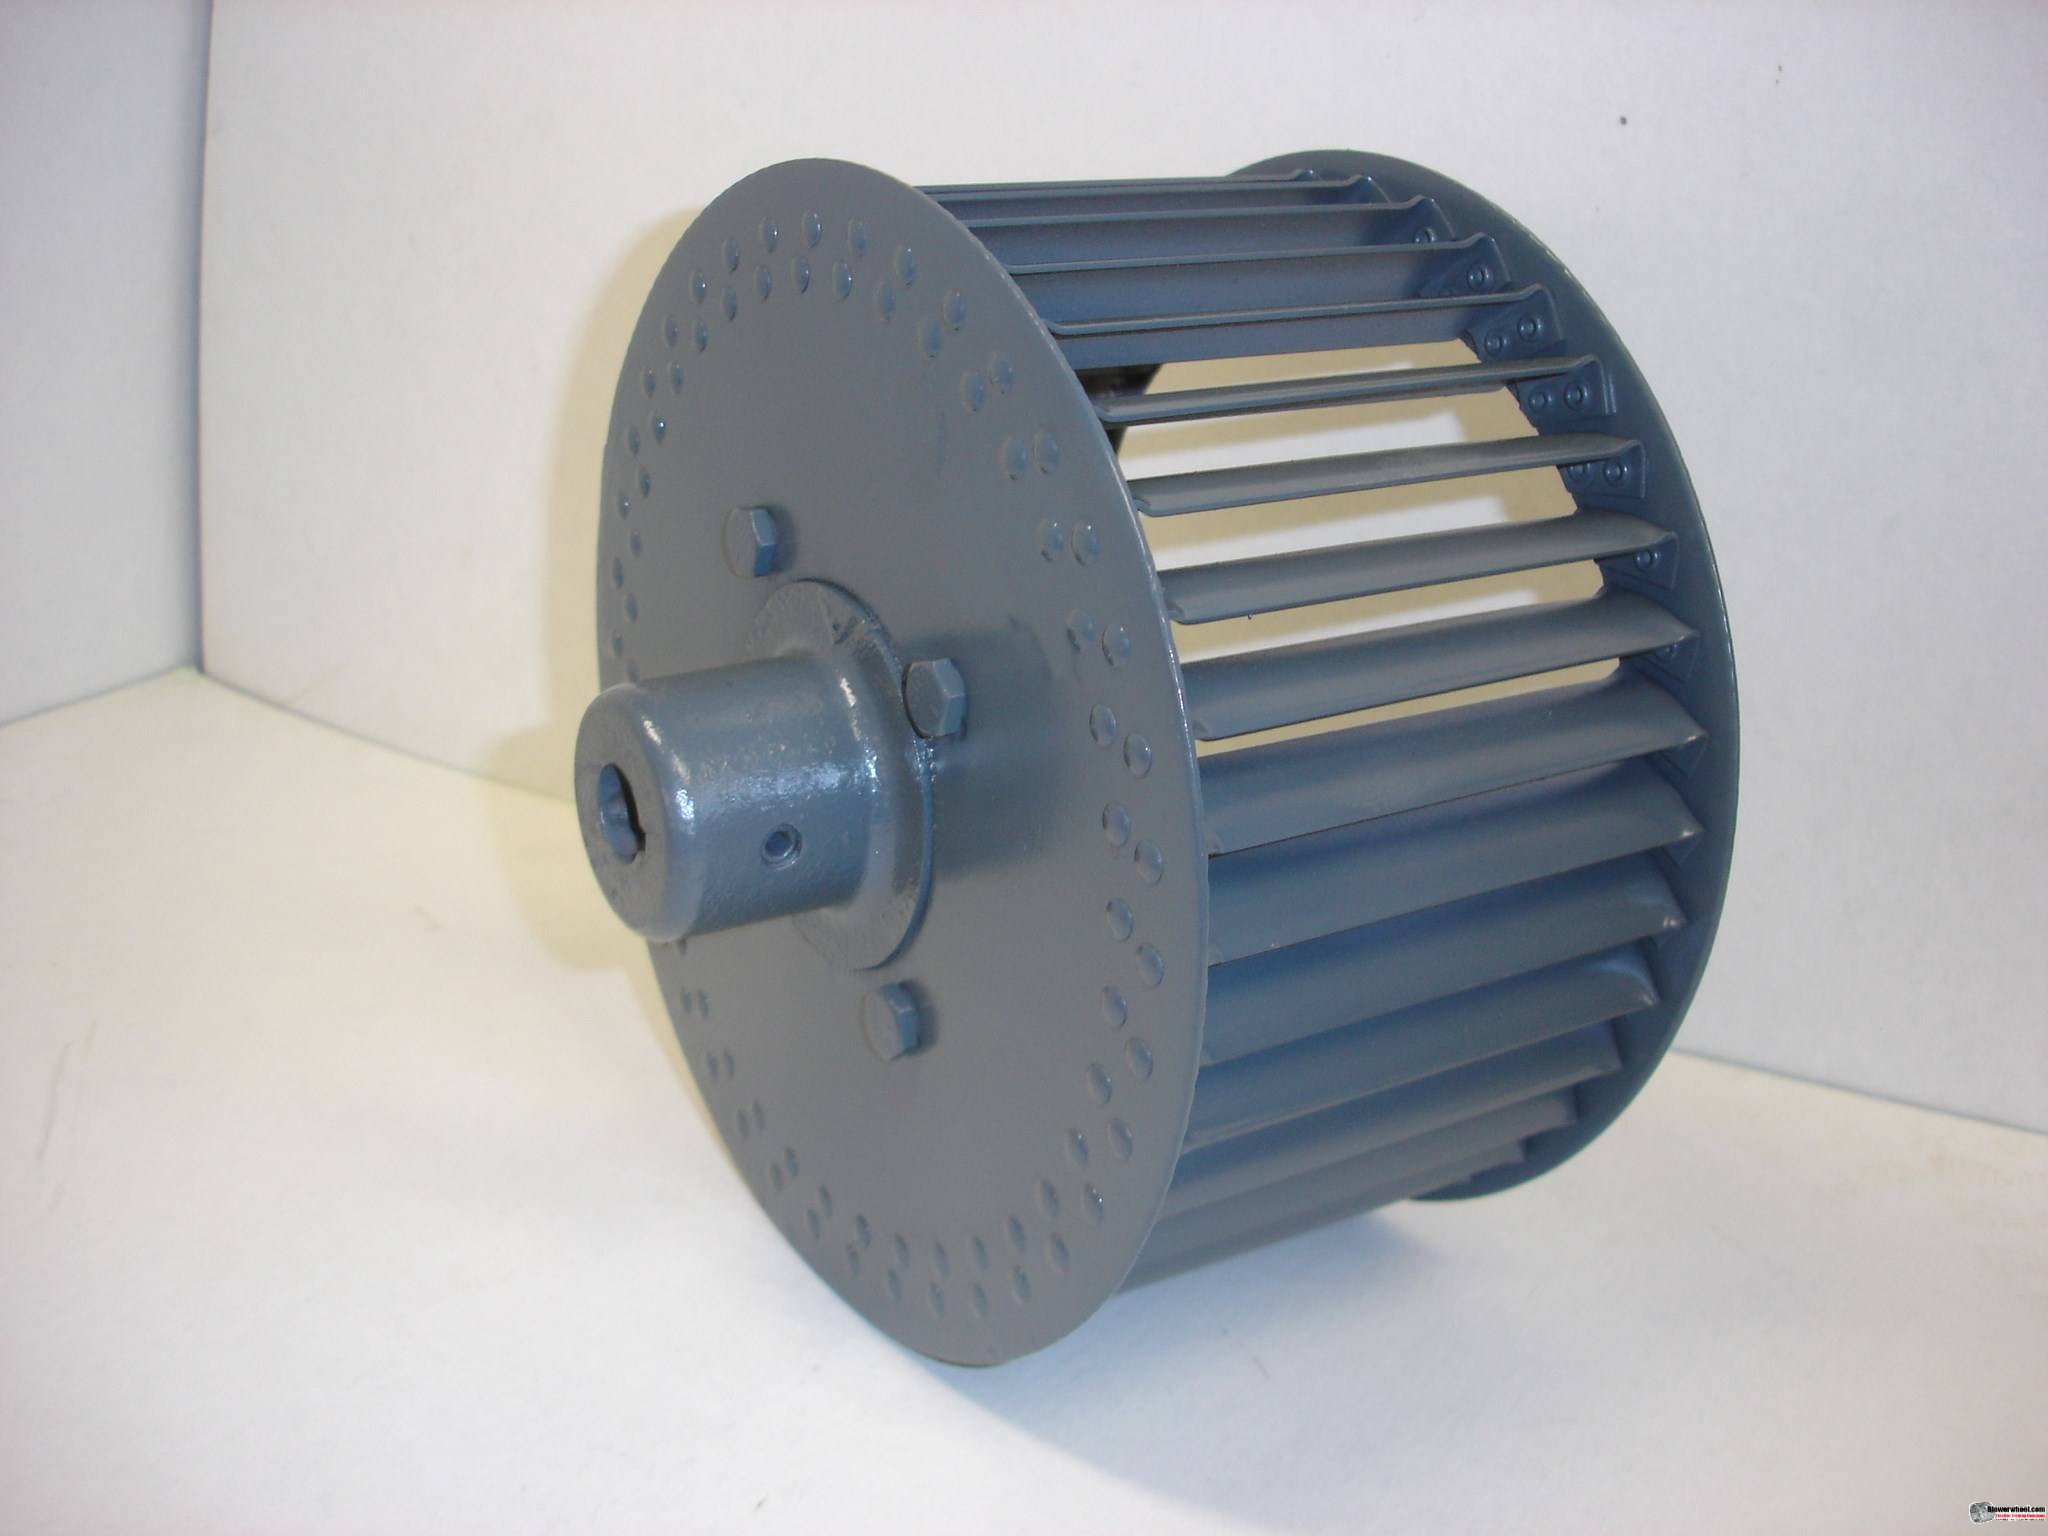 Single Inlet Aluminum Blower Wheel 10-13/16" Diameter 3-1/8" Width 11/16" Bore Clockwise rotation with an Outside Hub